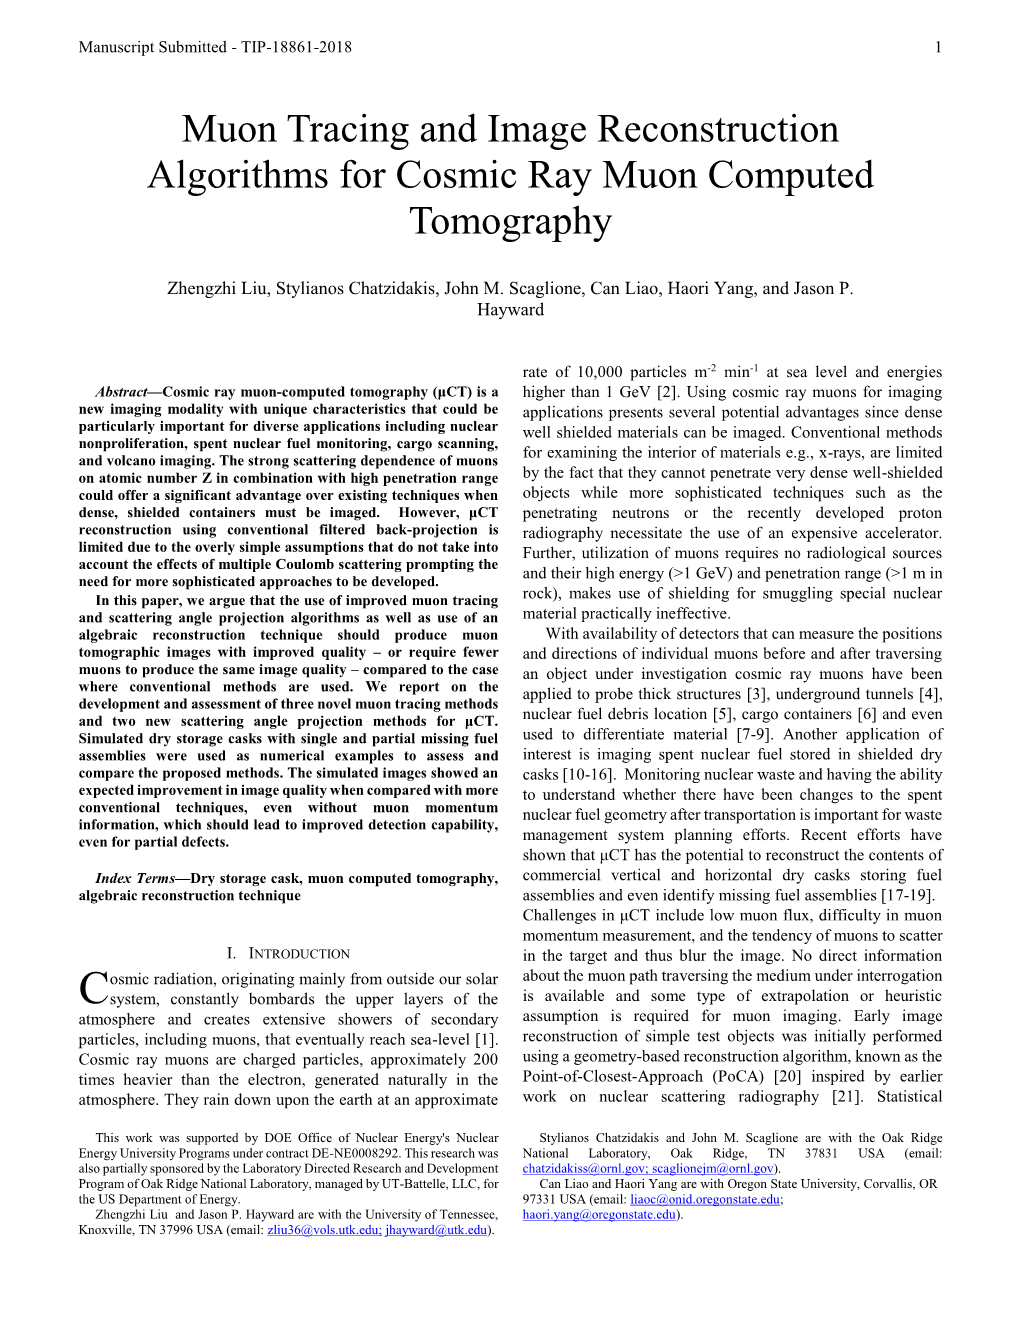 Muon Tracing and Image Reconstruction Algorithms for Cosmic Ray Muon Computed Tomography